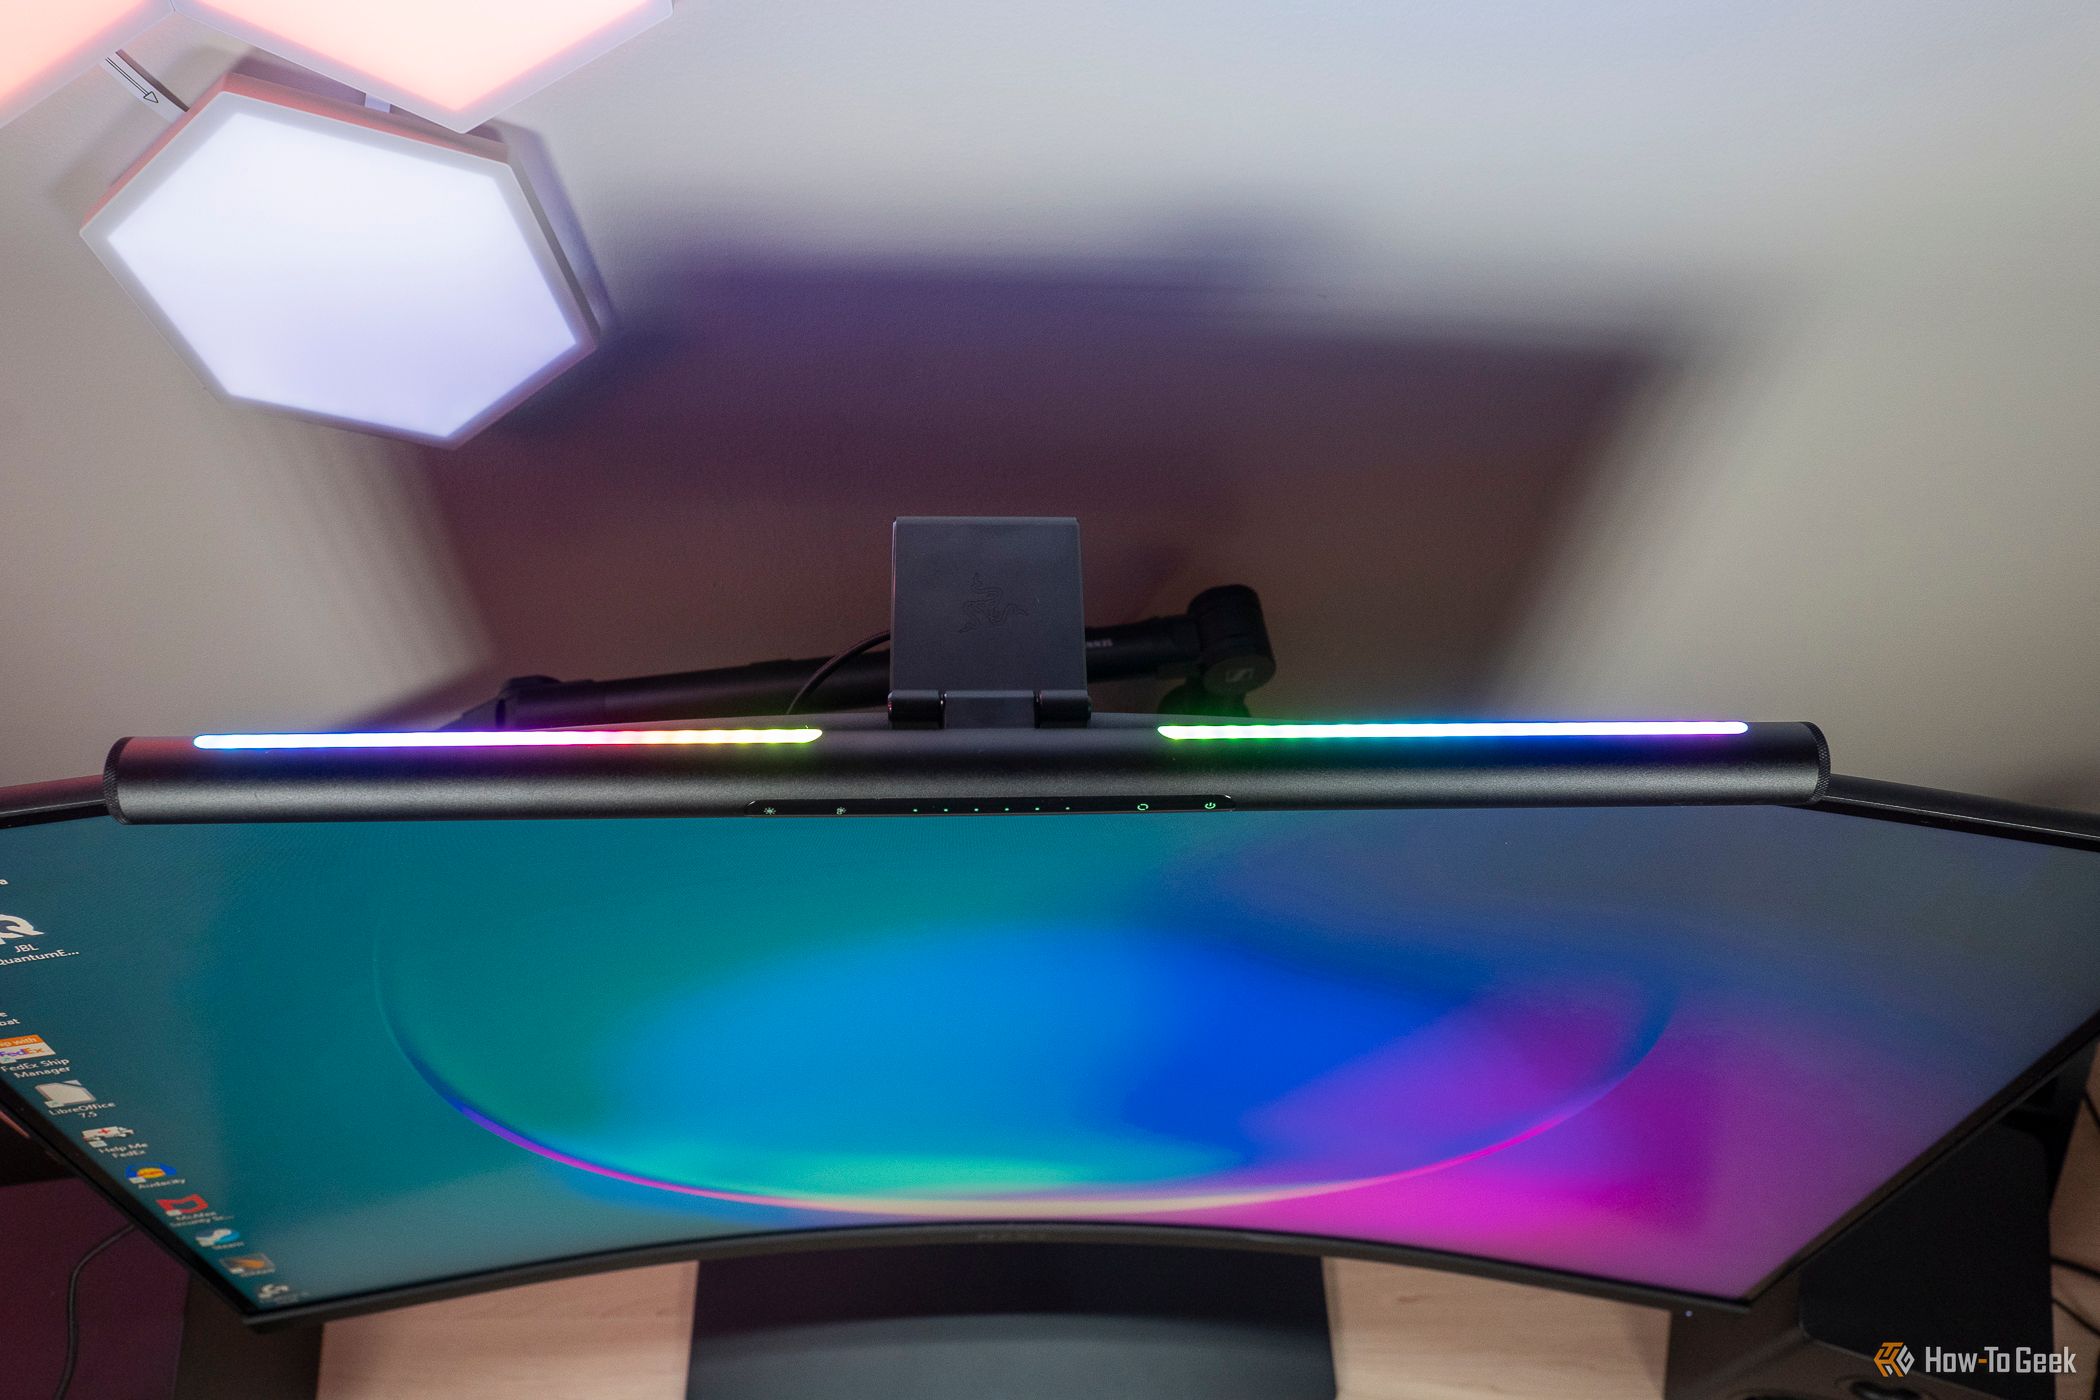 Top view of the Razer Aether monitor light bar.